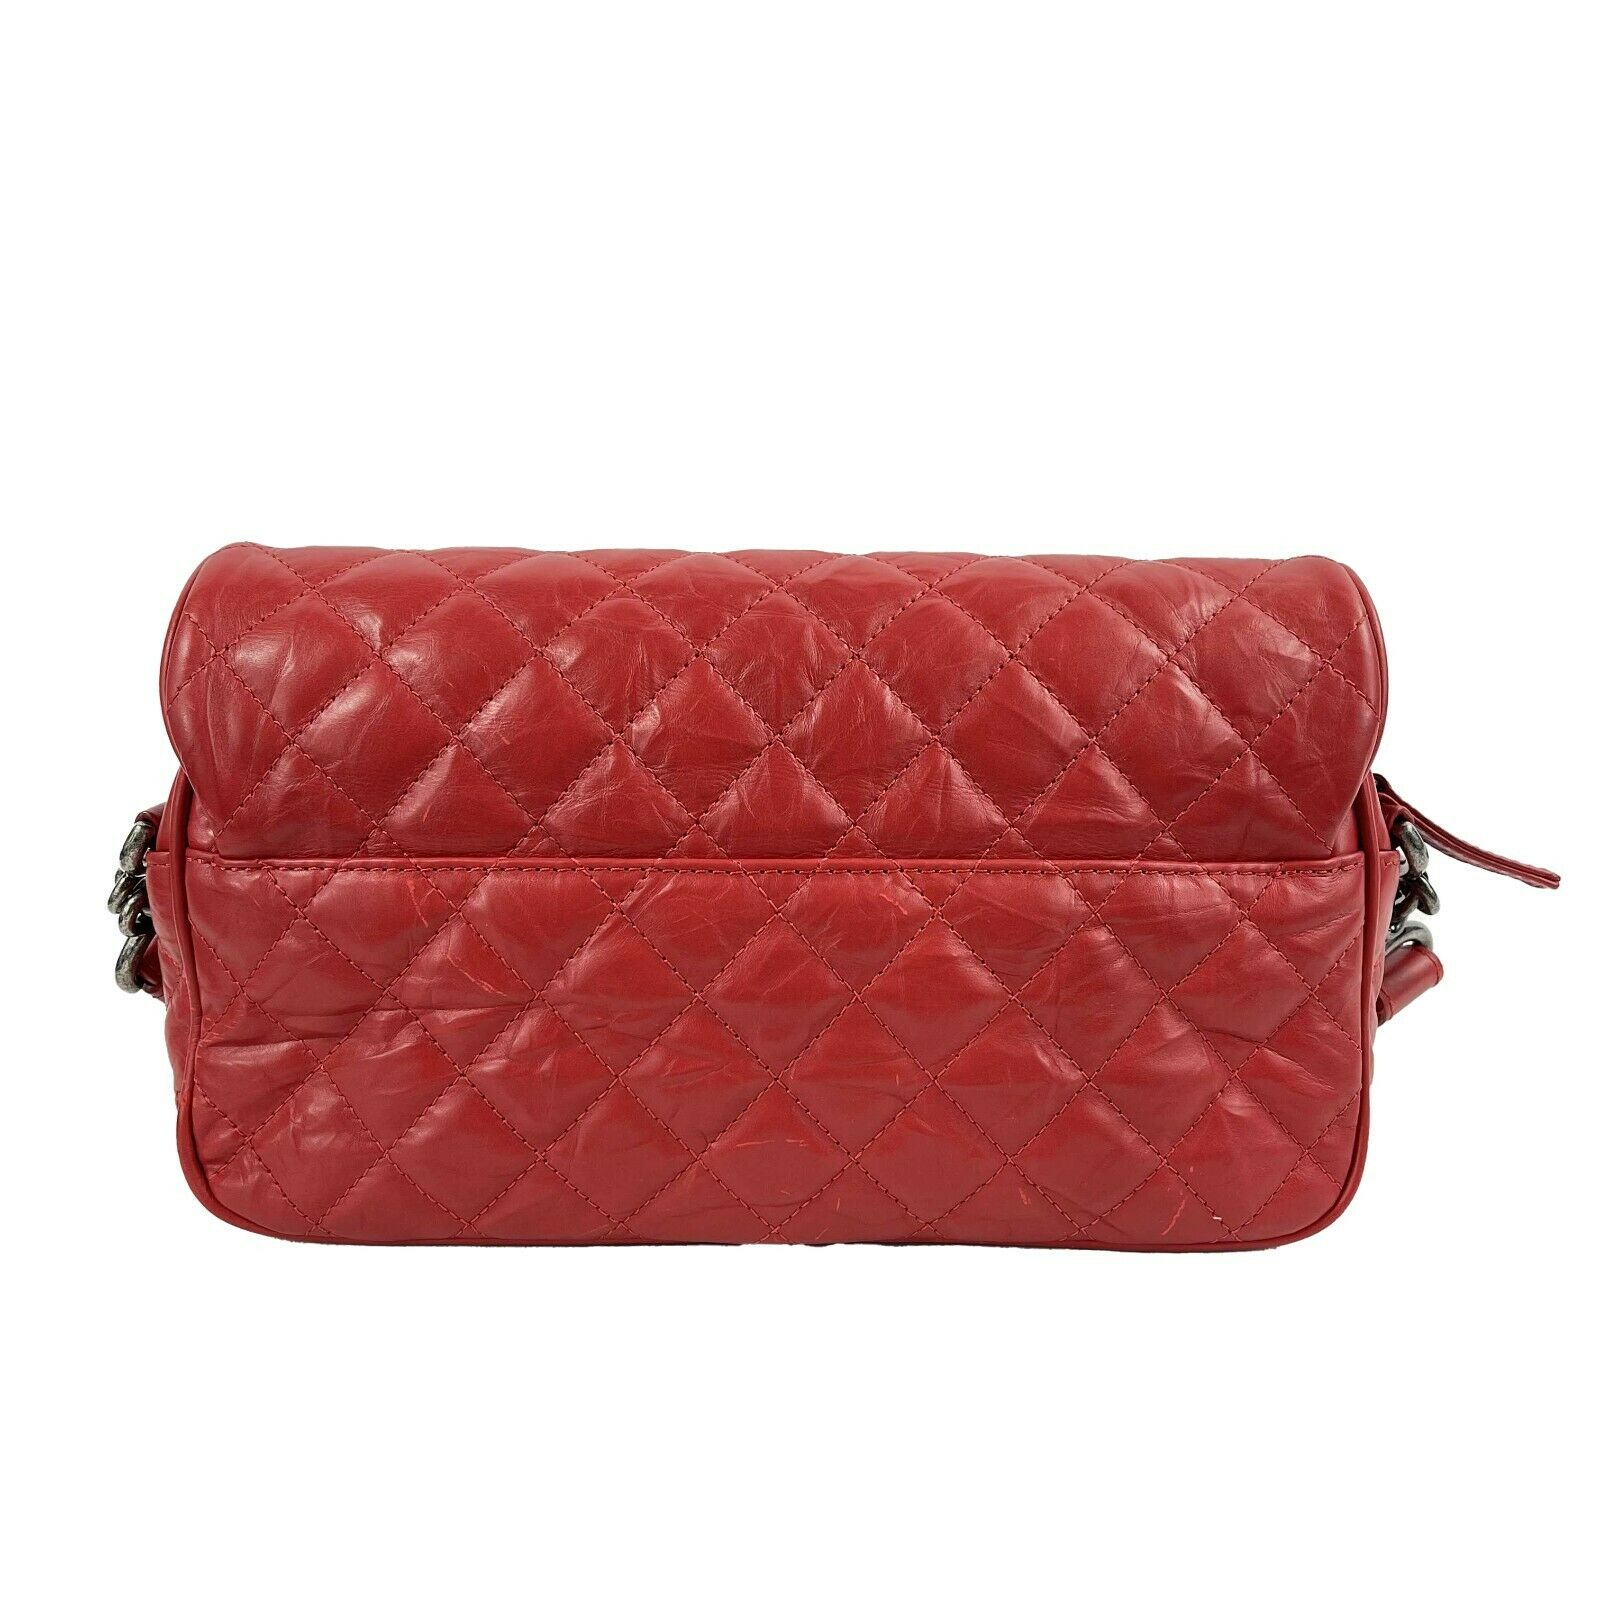 Coco handle Chanel bag in red 2019  Chanel clutch bag, Chanel classic flap  bag, Chanel bag